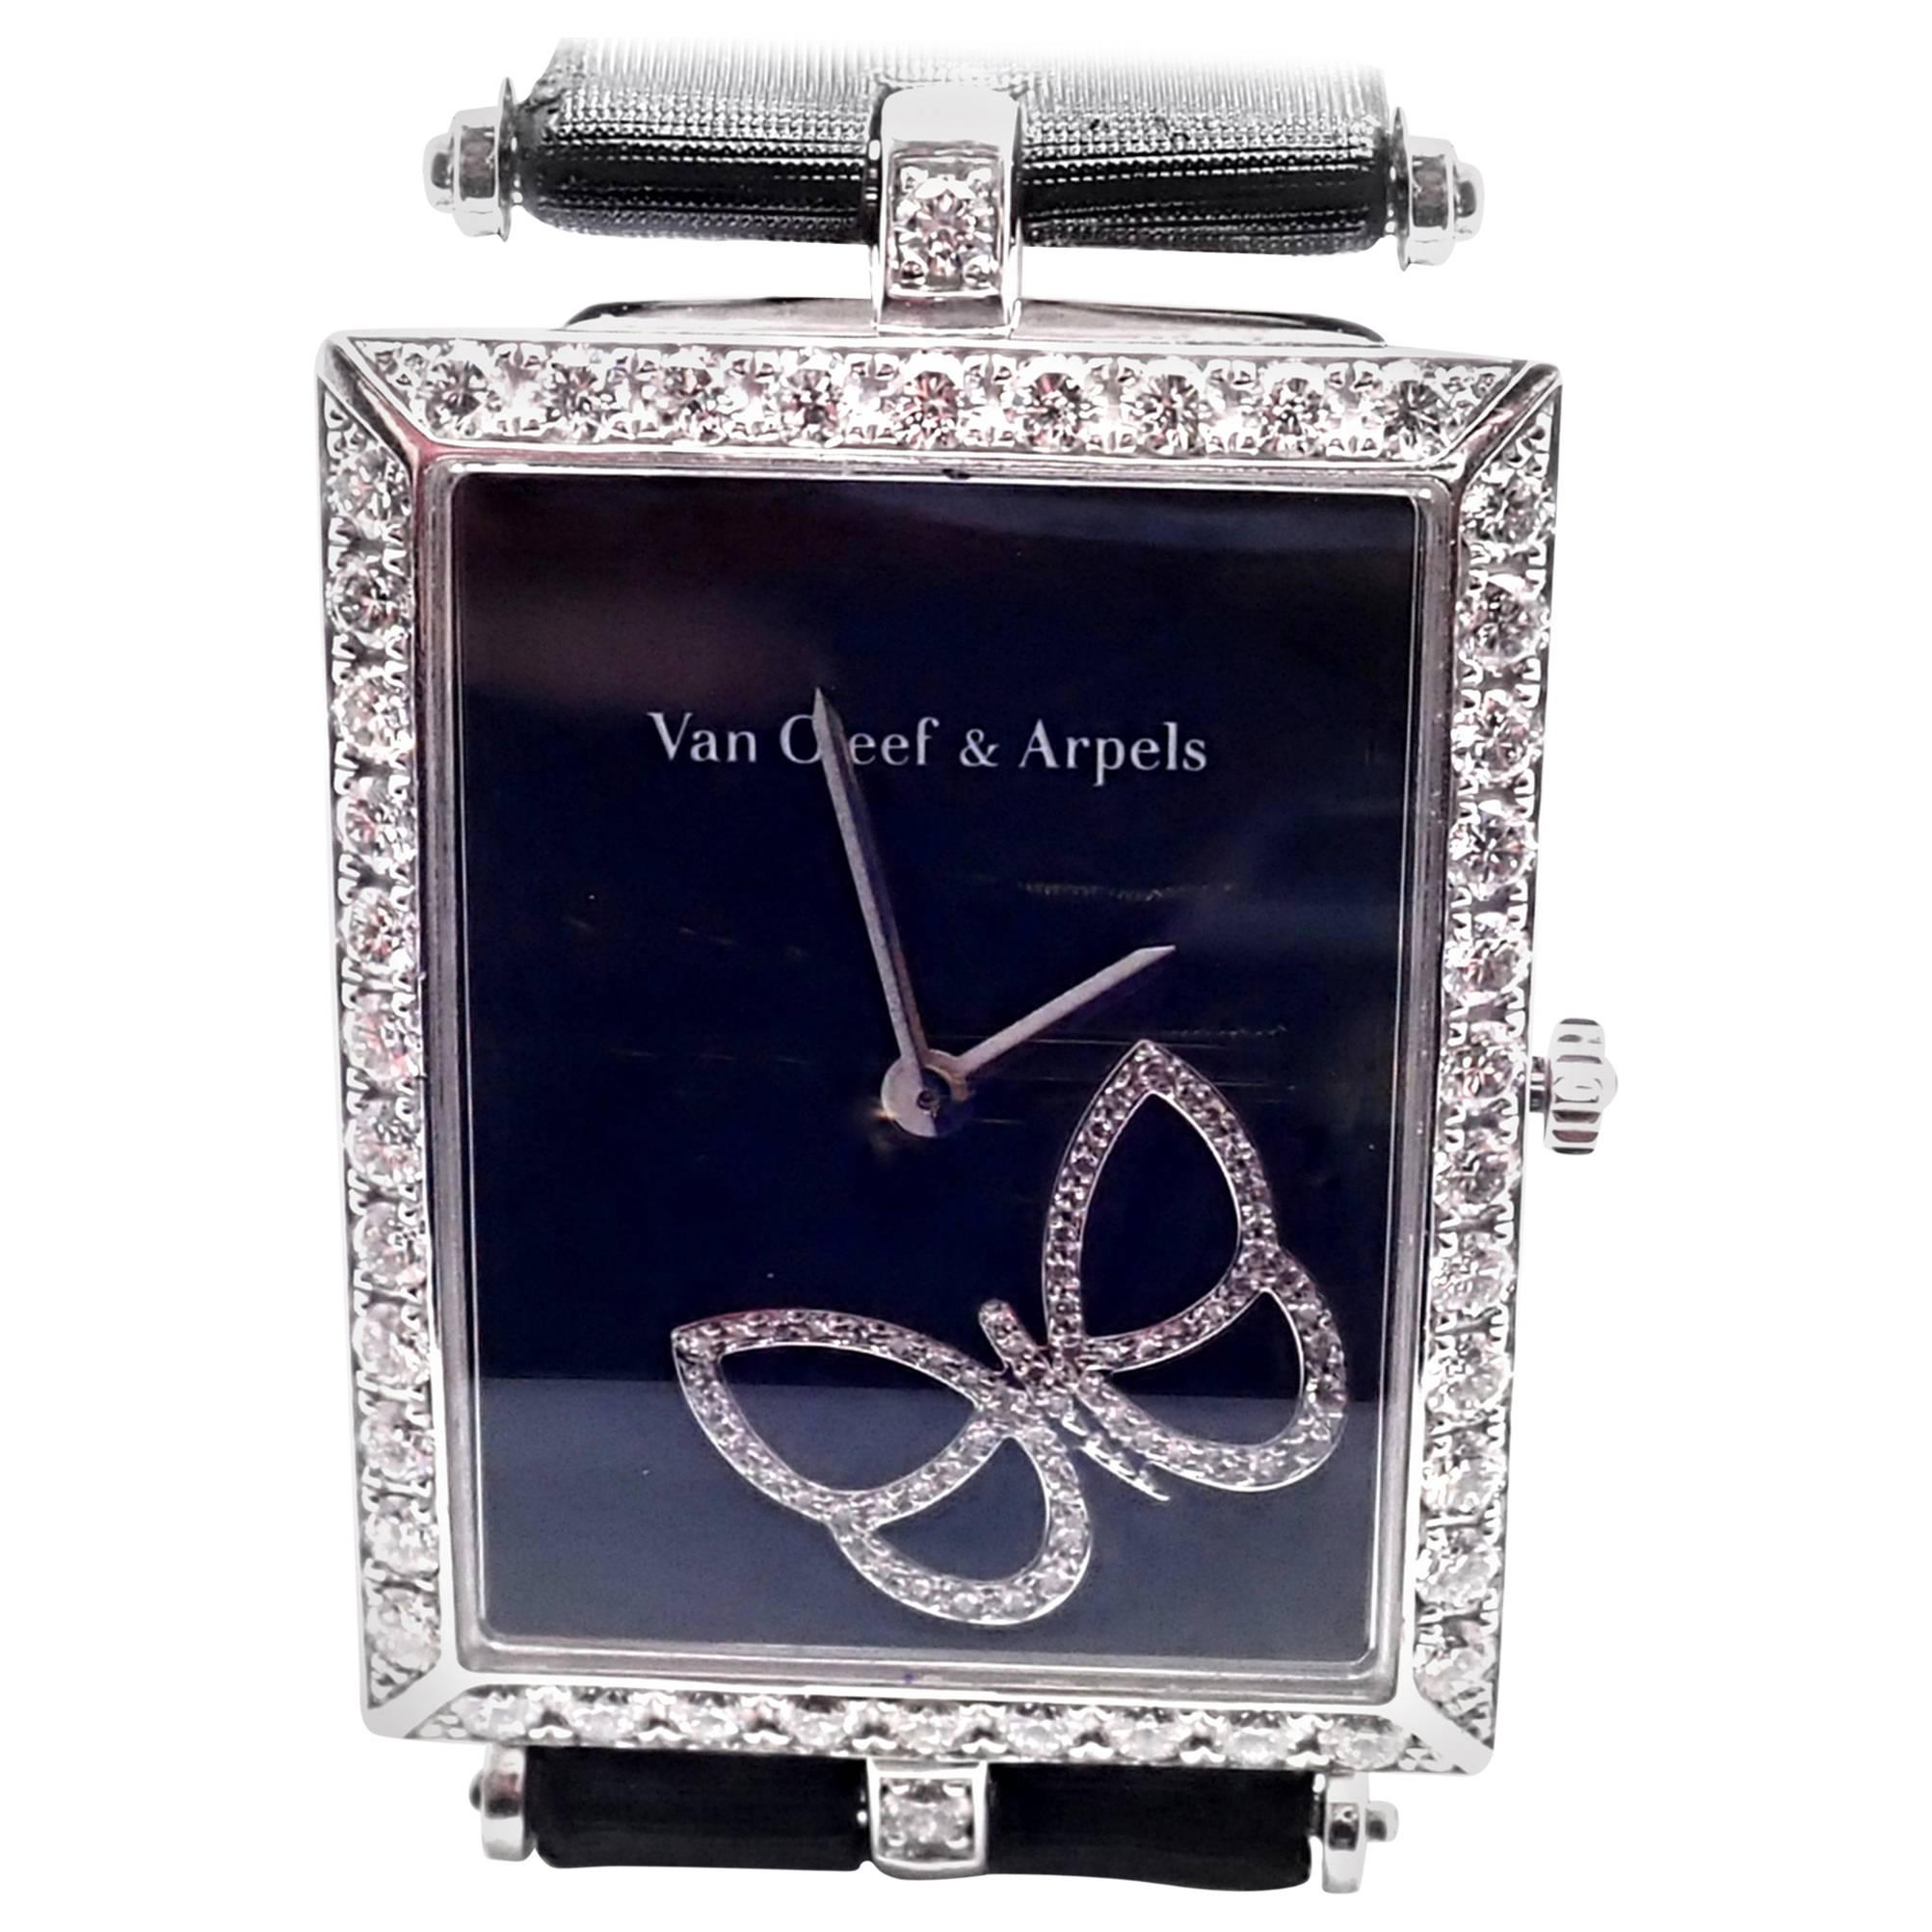 18k White Gold Diamond Limited Edition Papillon Butterfly Lady's Wristwatch by Van Cleef & Arpels. 
This watch comes with VCA box and service paper from VCA store.
This is a limited edition watch only 100 was made for 100 years Anniversary of Van